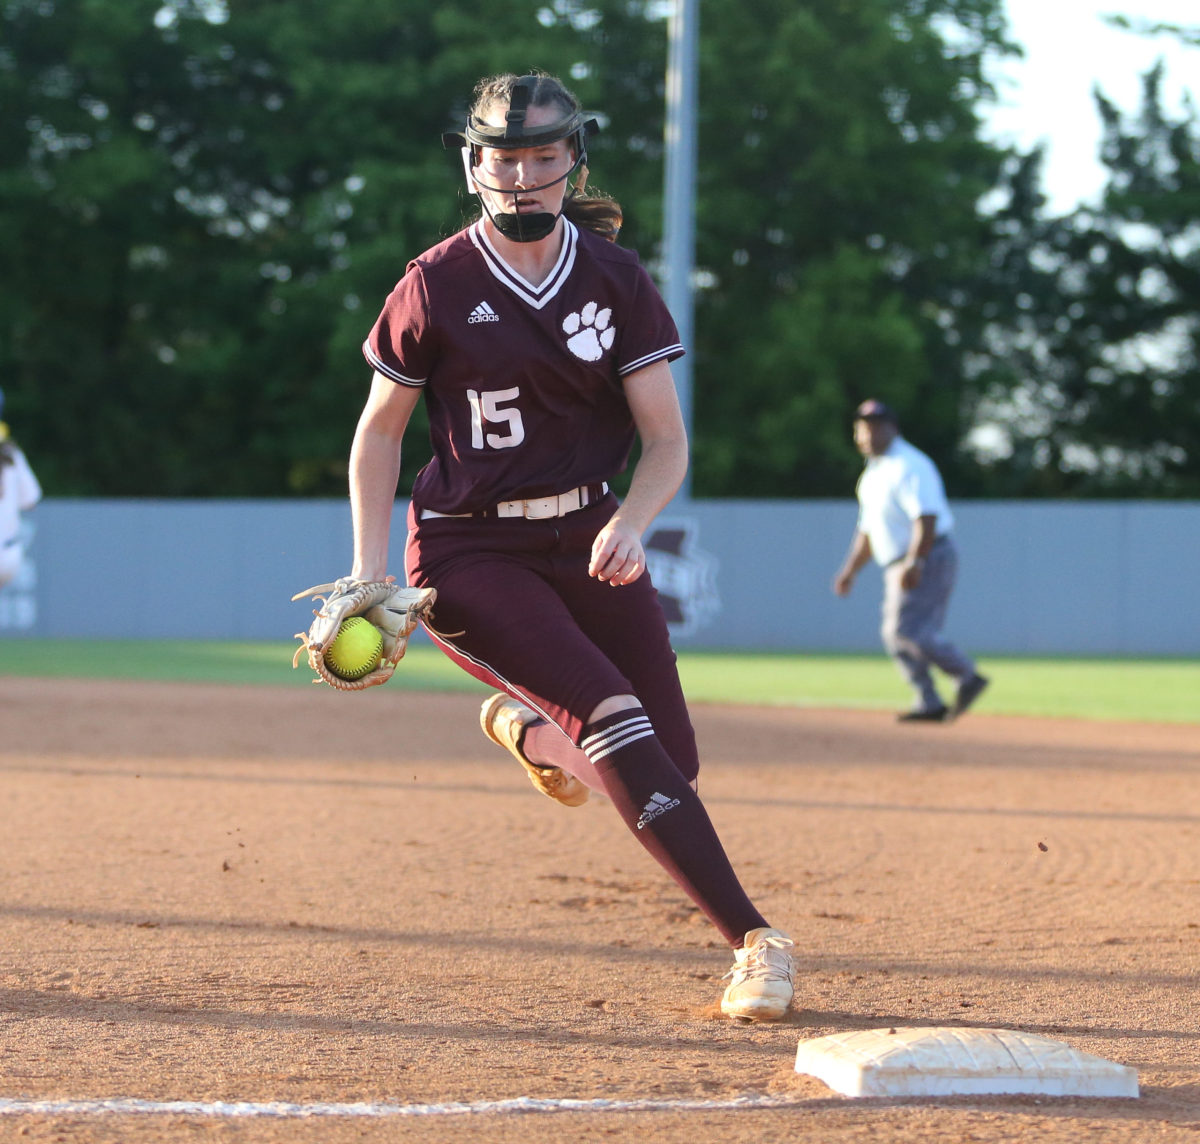 Raleigh High School's Hayley  Revette  (15) touches first base for a put-out in the second inning. Booneville and Raleigh played in game one of the MHSAA Class 3A Baseball Championship at Mississippi State University on Wednesday, May 12, 2021. Photo by Keith Warren